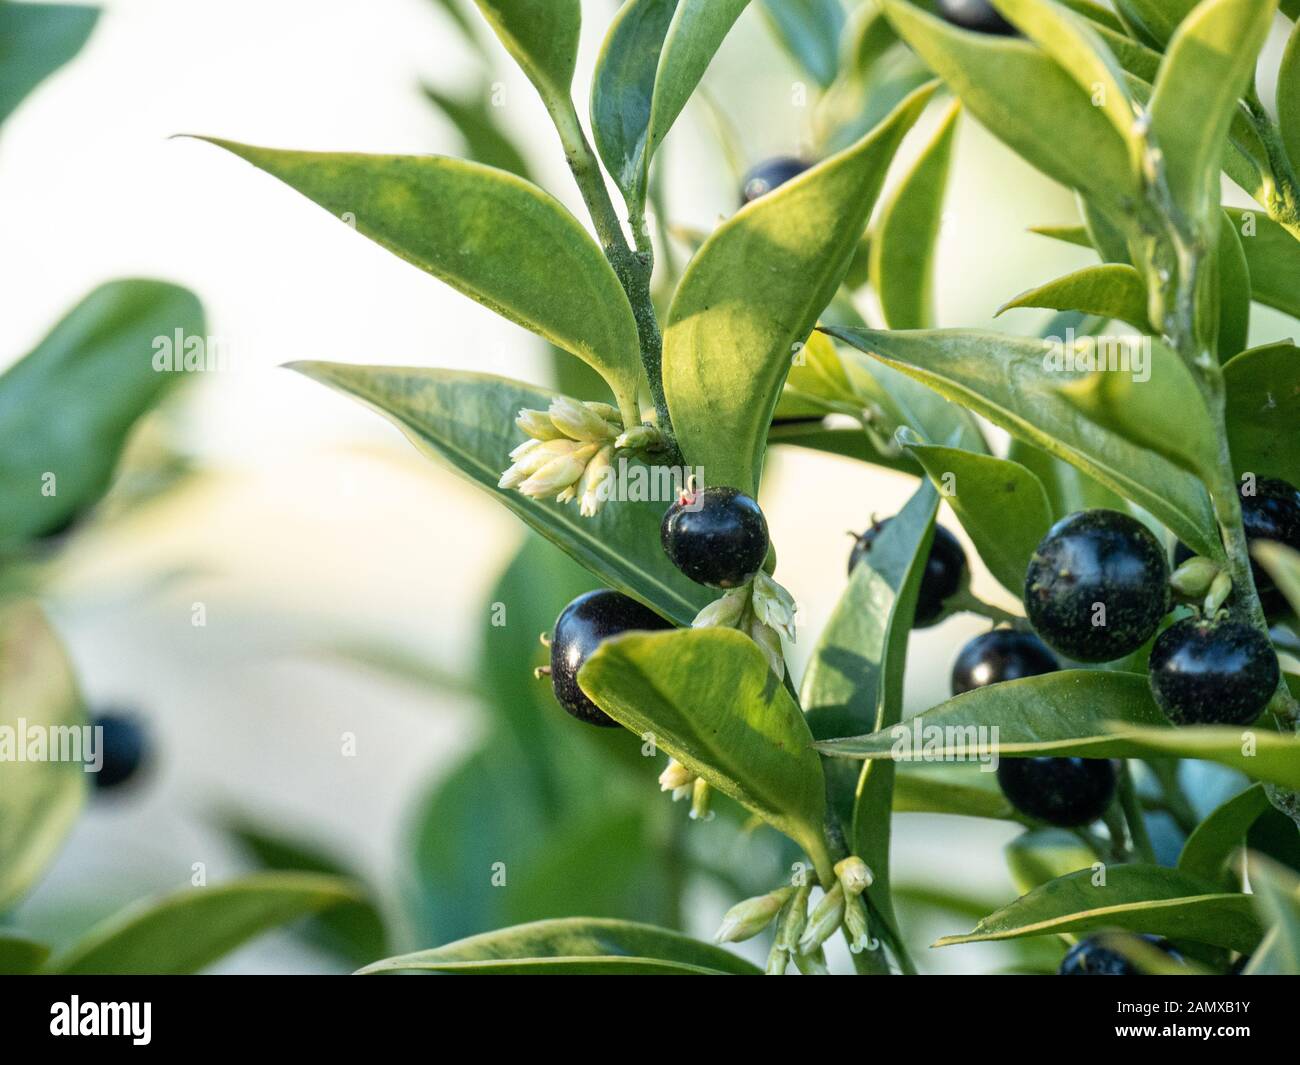 A close up showing the cream flowers and shiny black fruits of dwarf sweet box - Sarcocca humilis Stock Photo